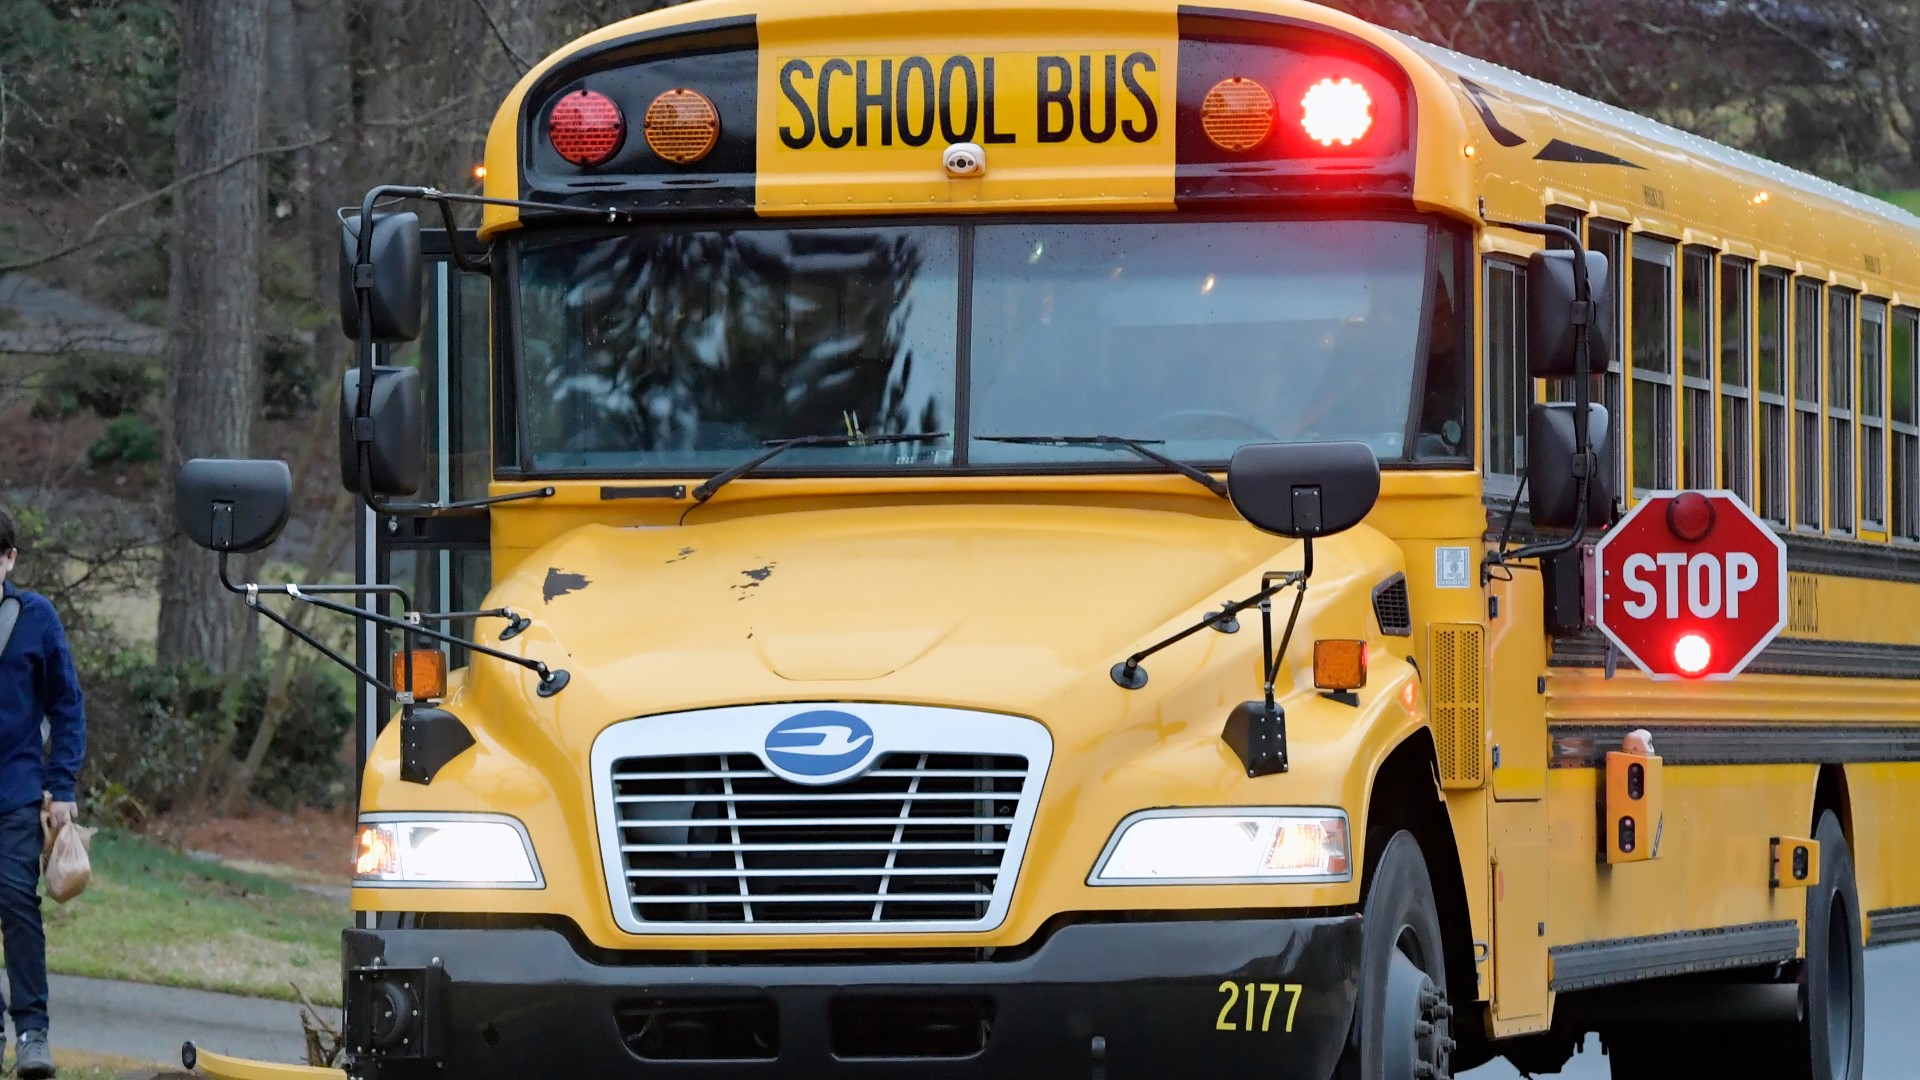 Last year, more than 9,000 drivers passed school buses that were stopped with red lights flashing in the county.